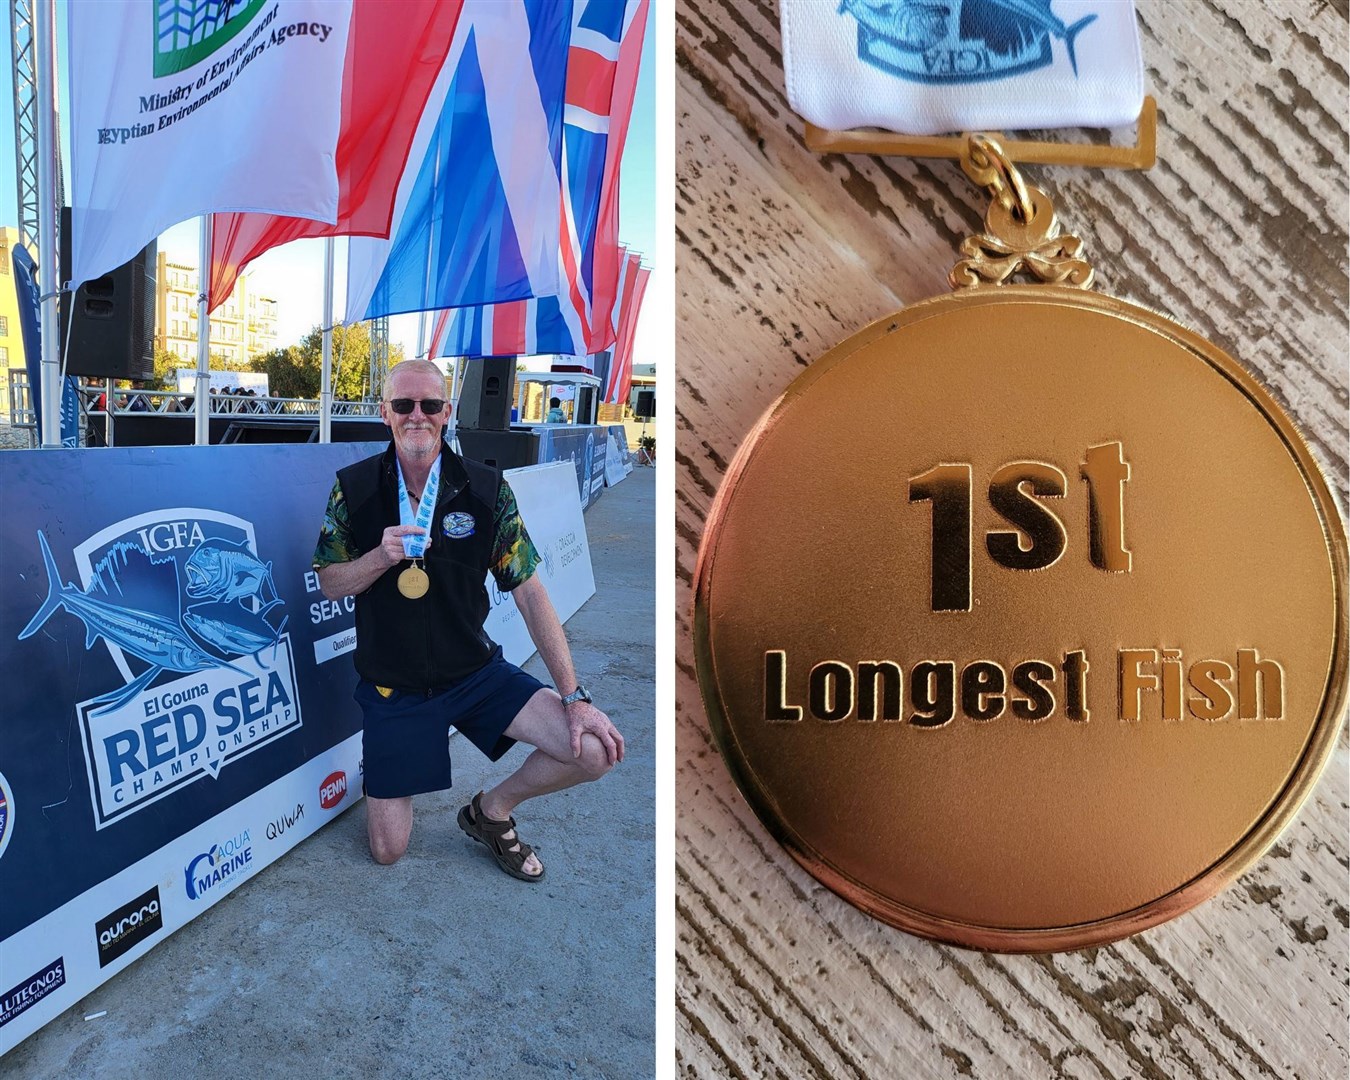 Pete Hill won gold in the longest fish category of the event.